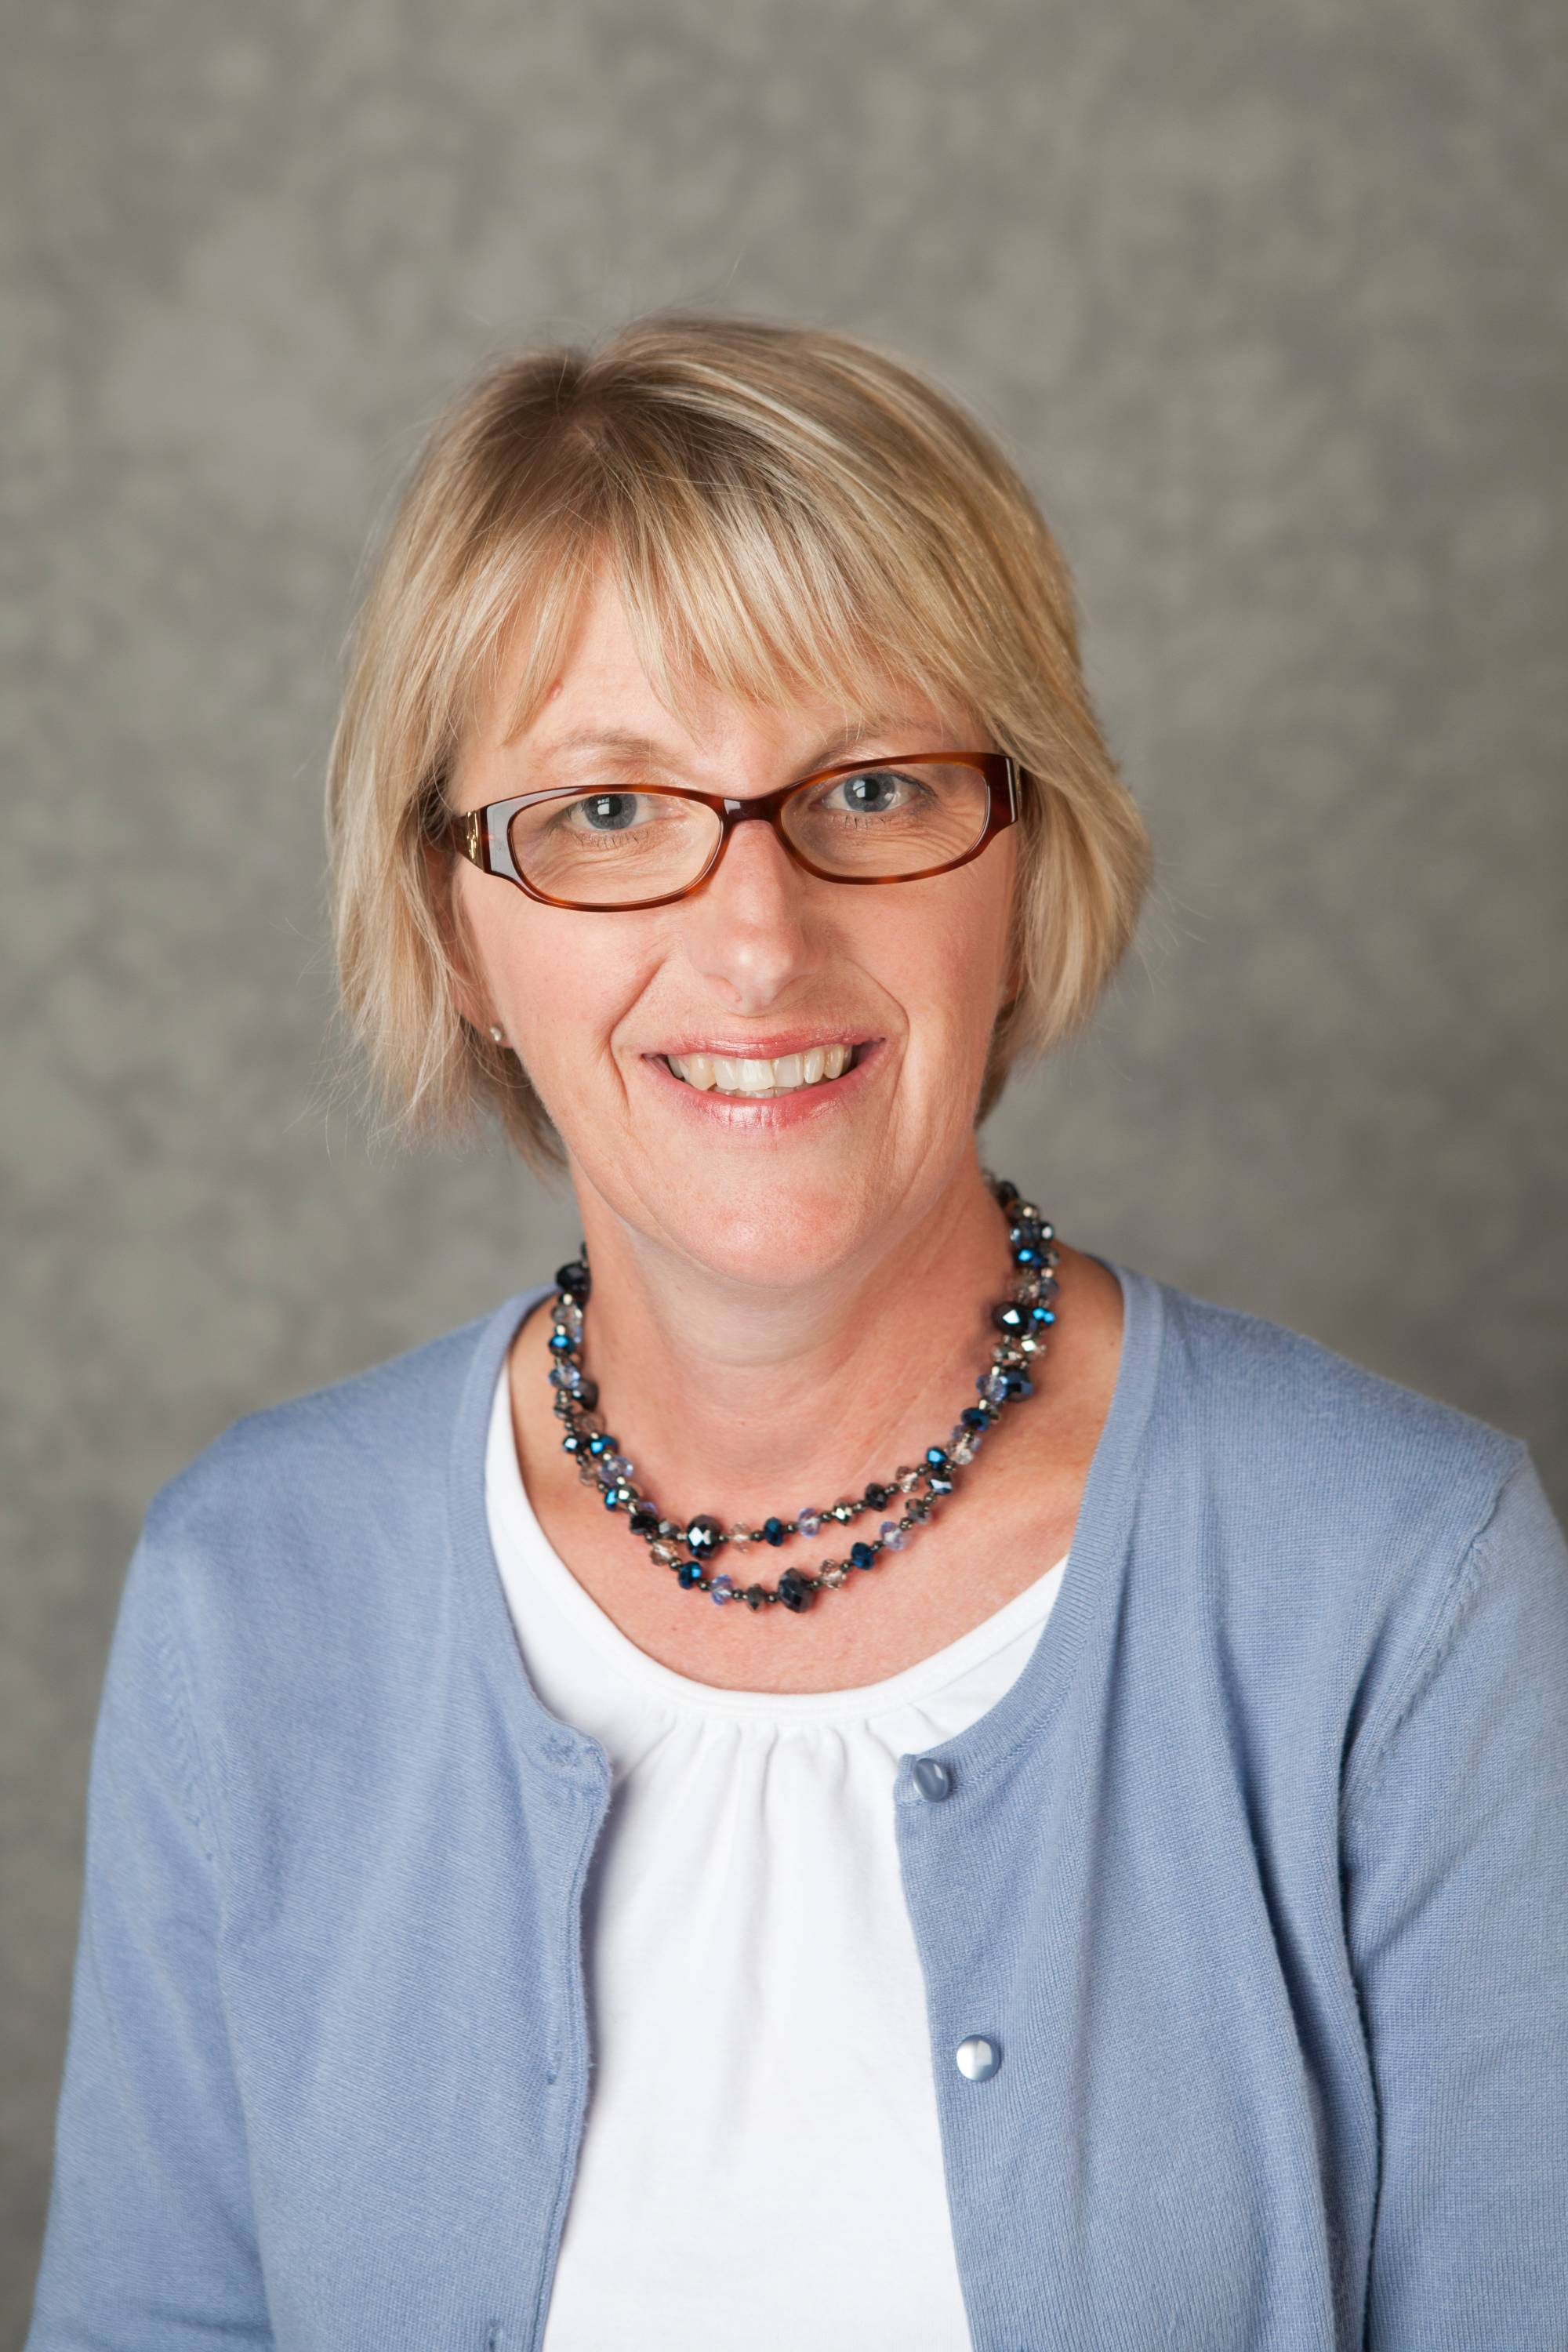 Professional Headshot of Patty Stow Bolea, School of Social Work and Pew FTLC Faculty Fellow